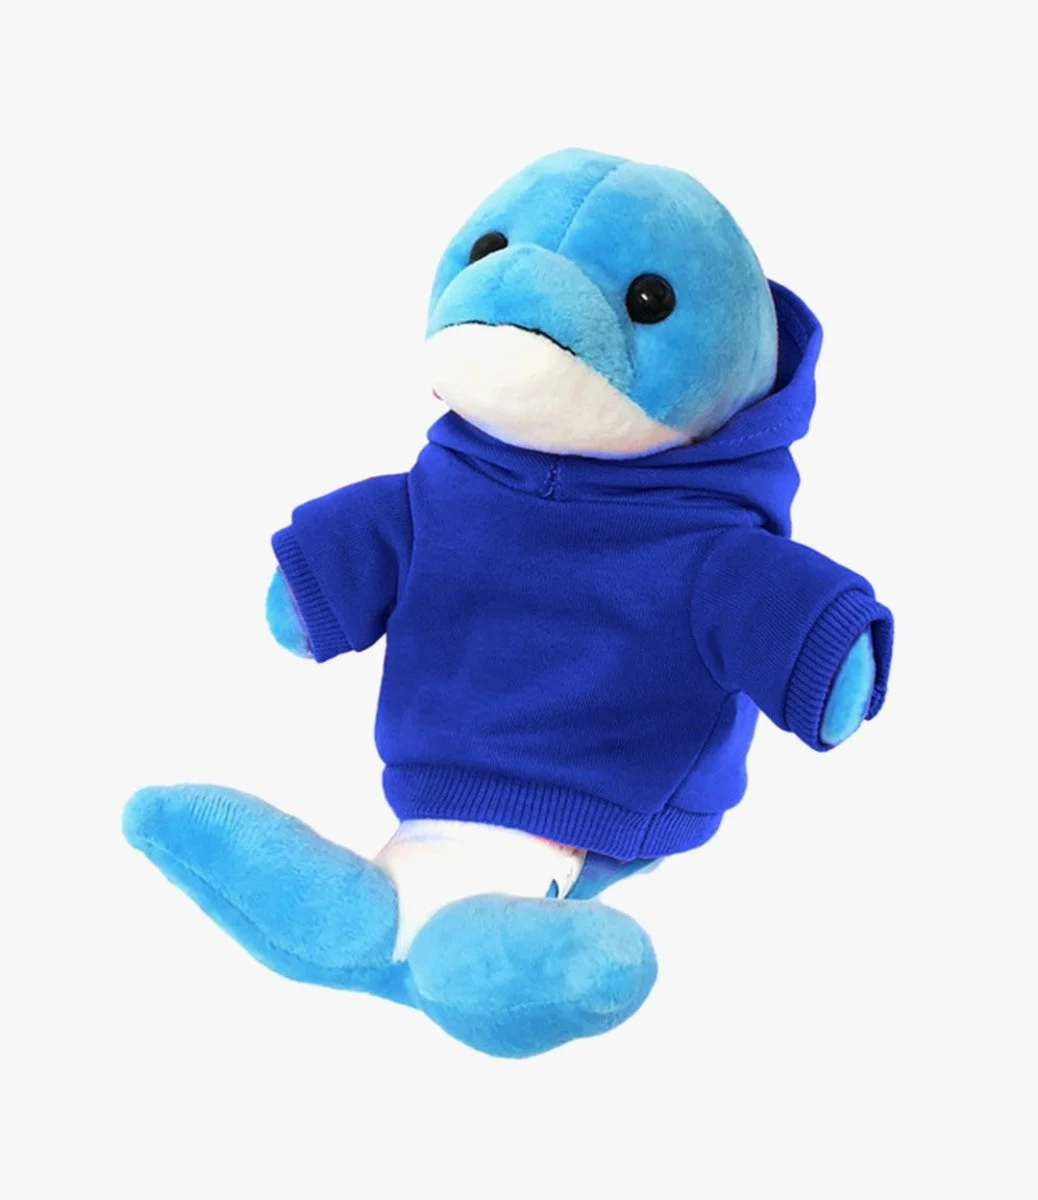 Blue Dolphin with Blue Hoodie 20cm by Fay Lawson